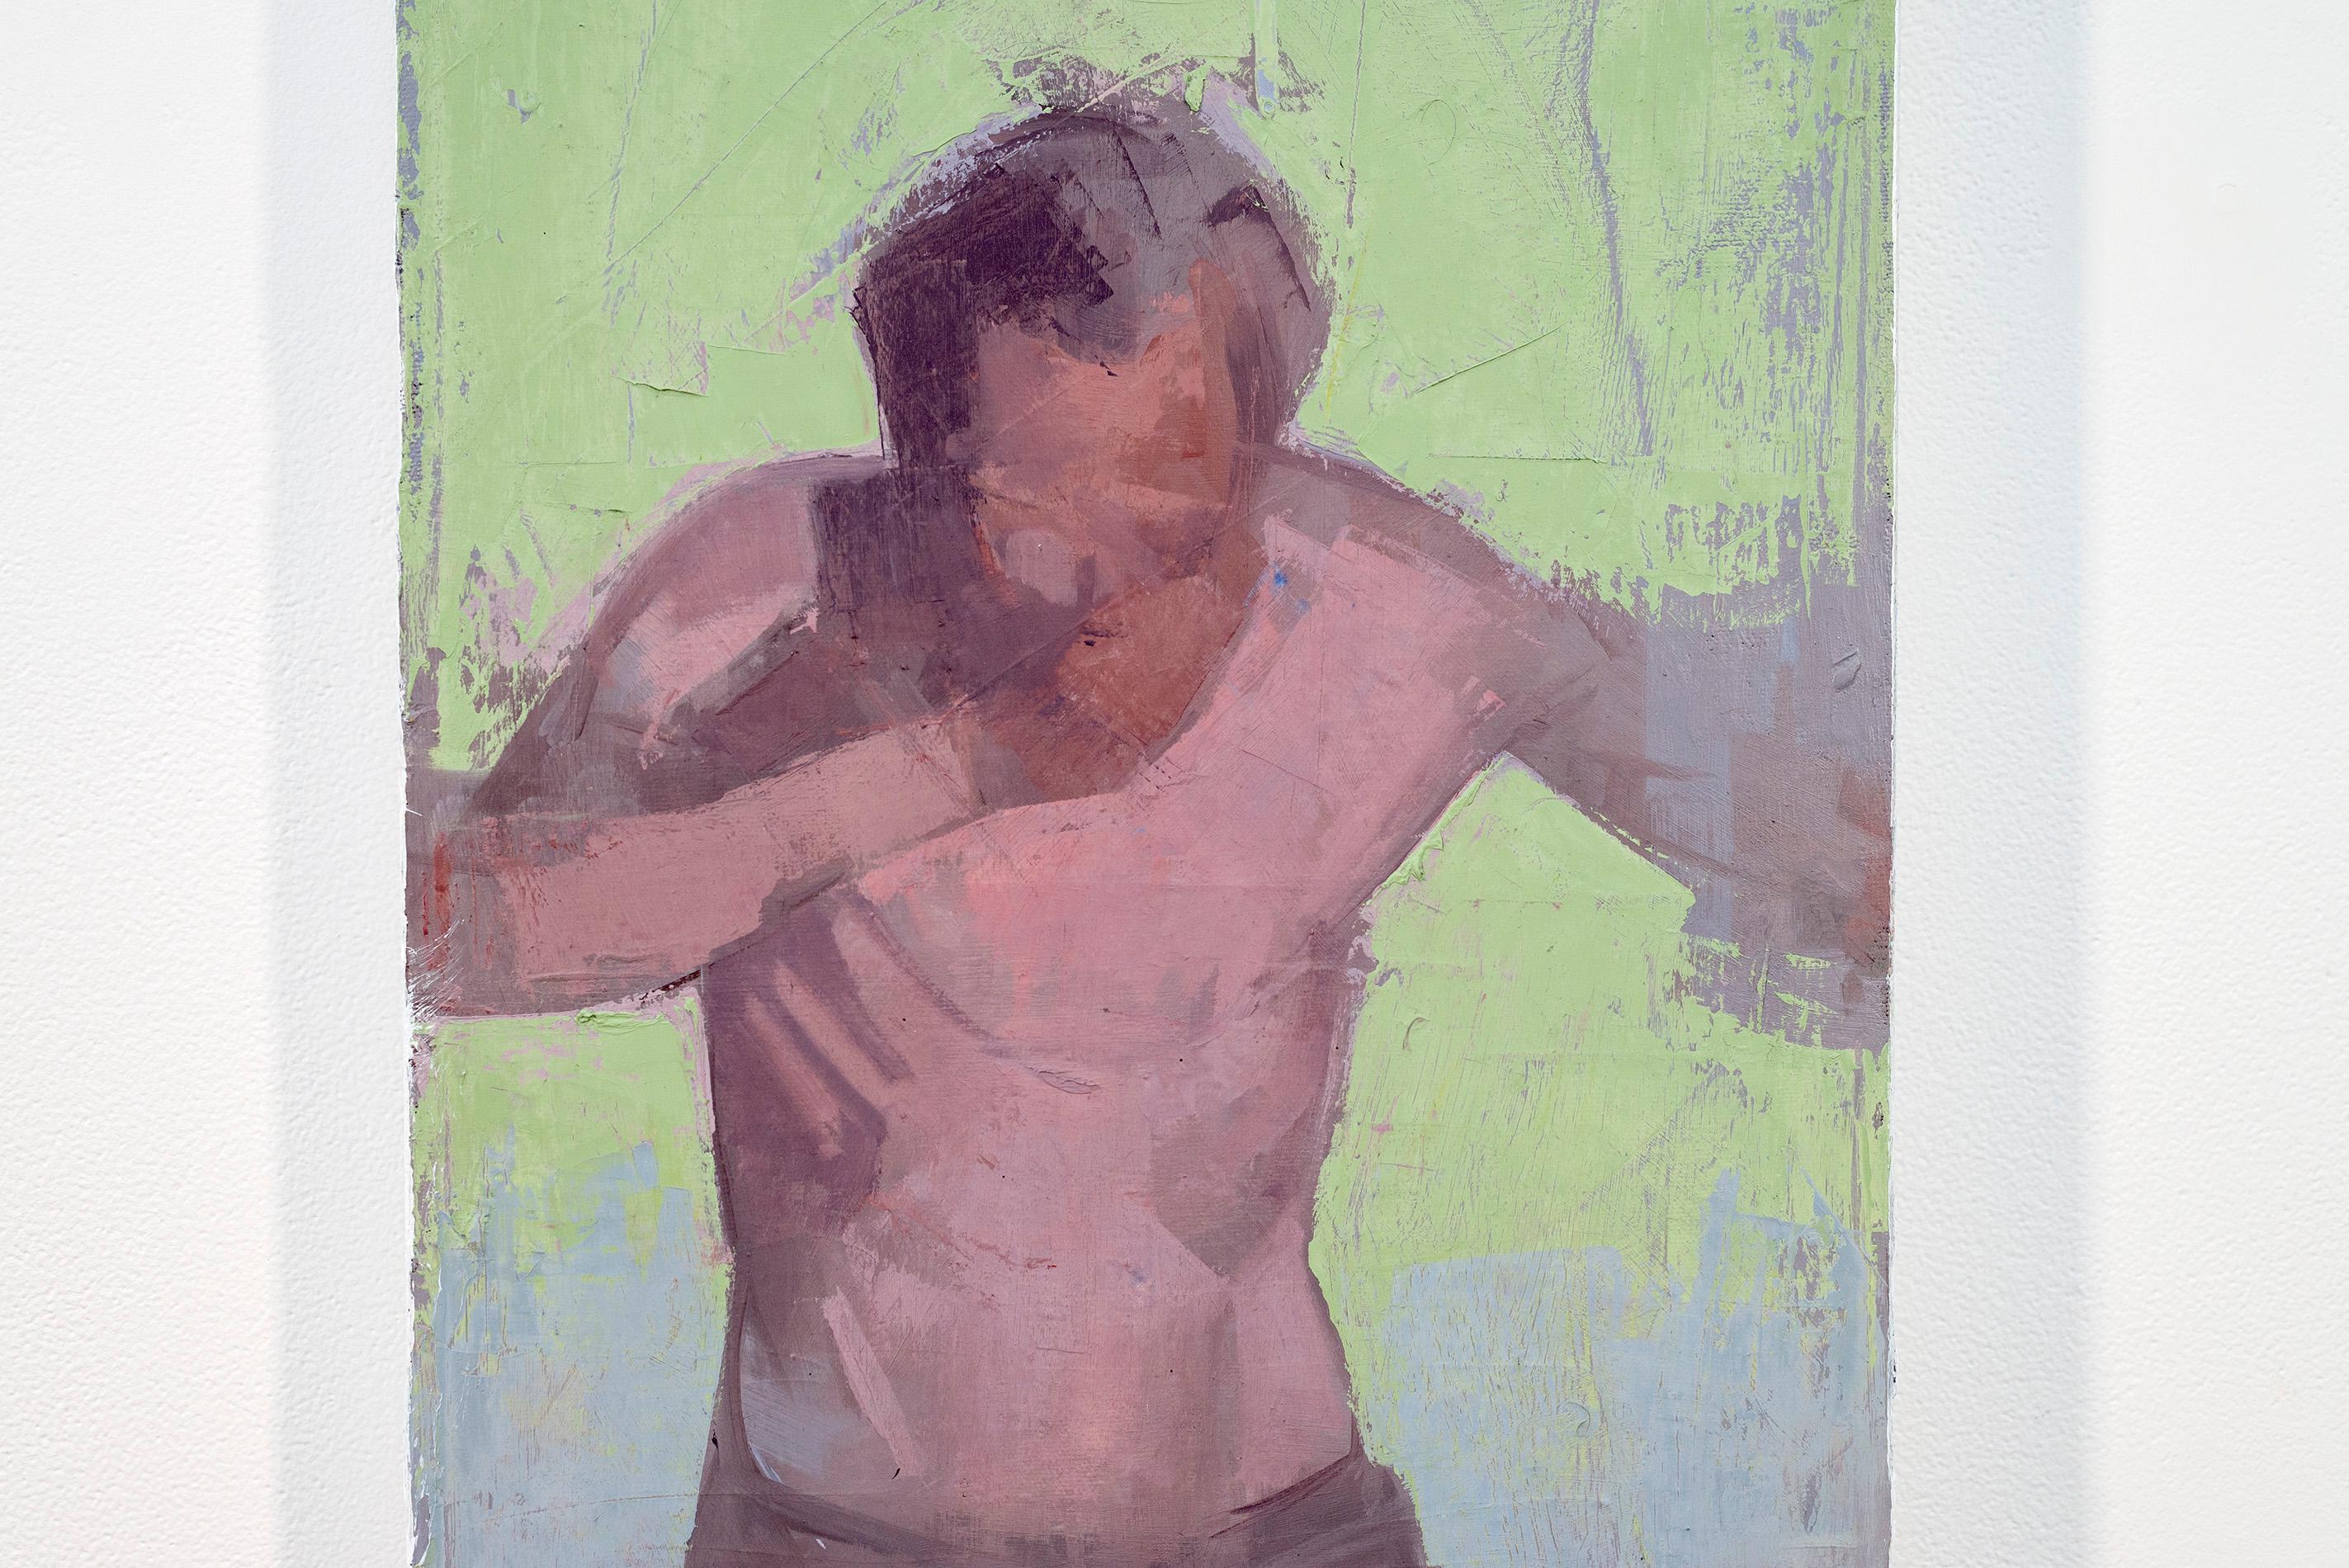 Diver No 1 - green, purple, portrait, male, abstract figurative, oil on canvas - Realist Painting by Daniel Hughes